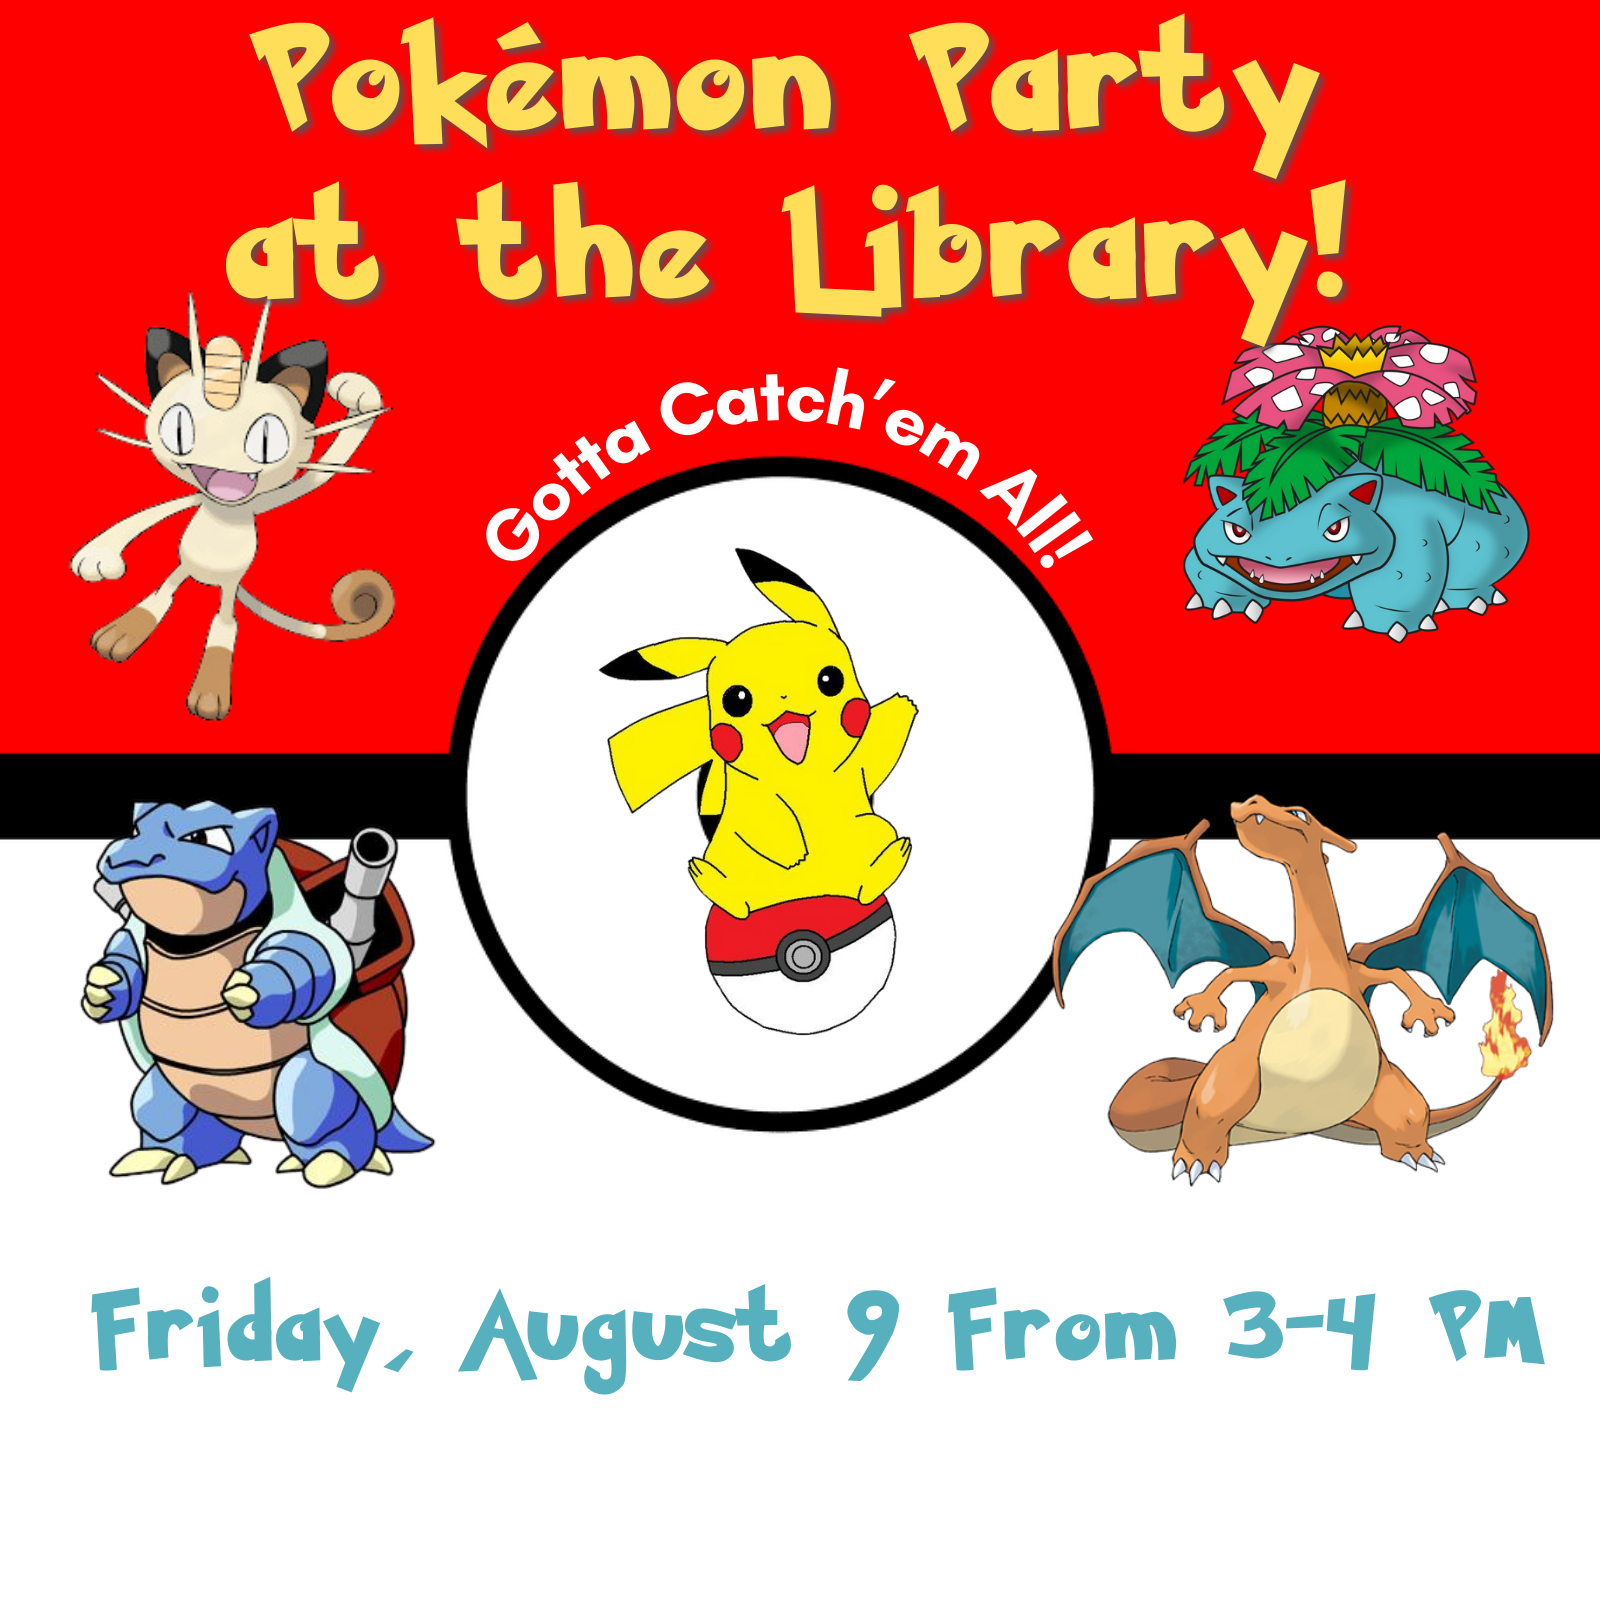 Red and white background with black line and circle in center. Five various Pokemon Characters are positioned in the center. Top text in yellow reads: Pokemon Party at the Library! Then curved text in white reads Gotta Catch em All! Below characters teal text reads Friday, August 9 from 3-4pm.